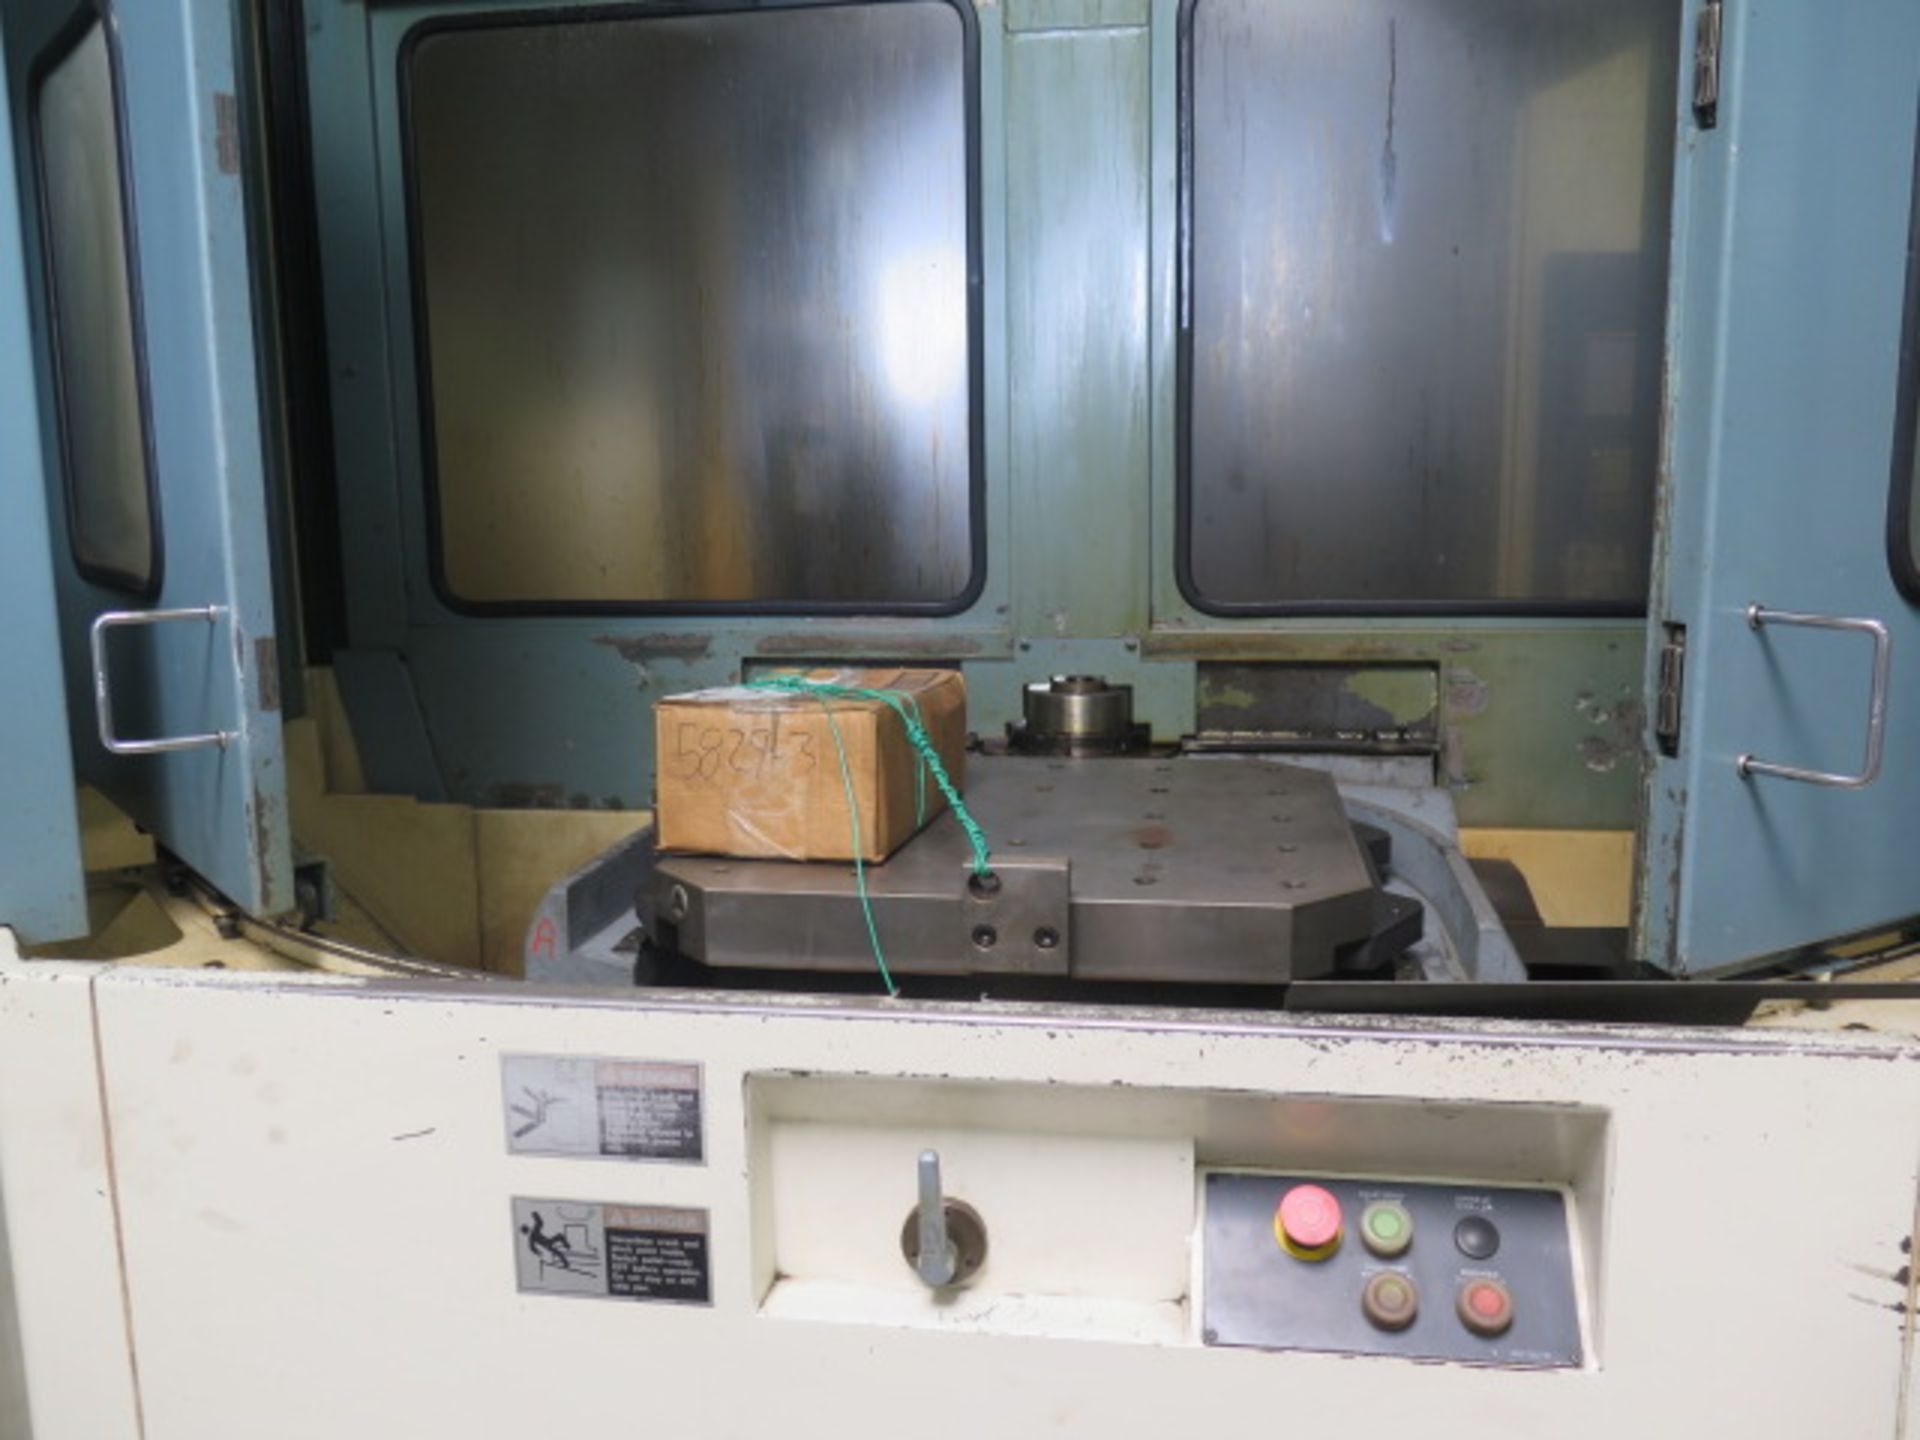 Nigata SPN66 2-Pallet 4-Axis CNC HMC s/n 46600095 w/ Fanuc 16i-M Controls, SOLD AS IS - Image 12 of 24